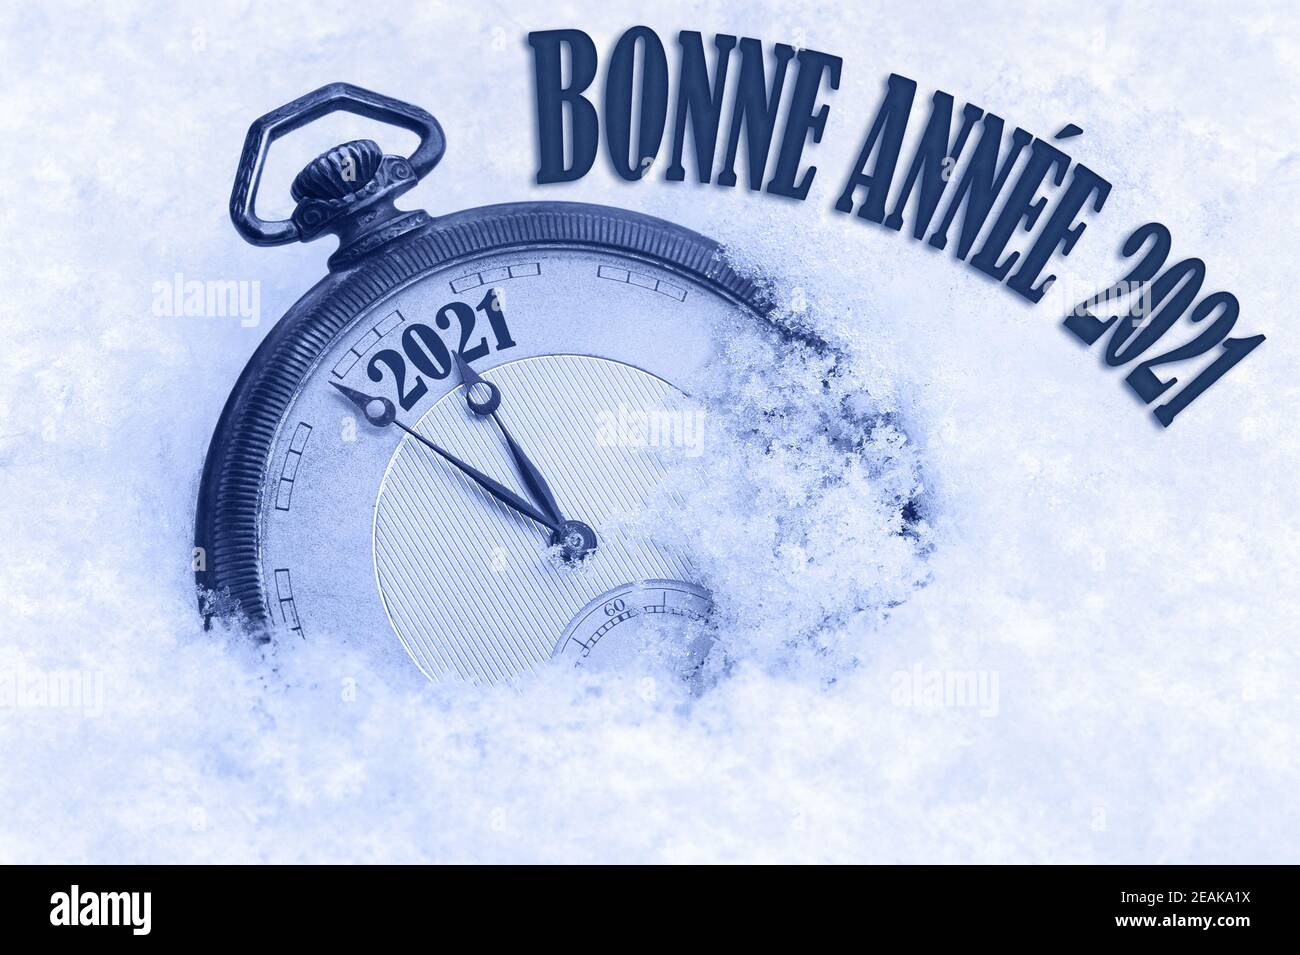 Bonne Annee, Happy New Year 2021 greeting in French language, text, greeting card 2021, countdown to midnight Stock Photo